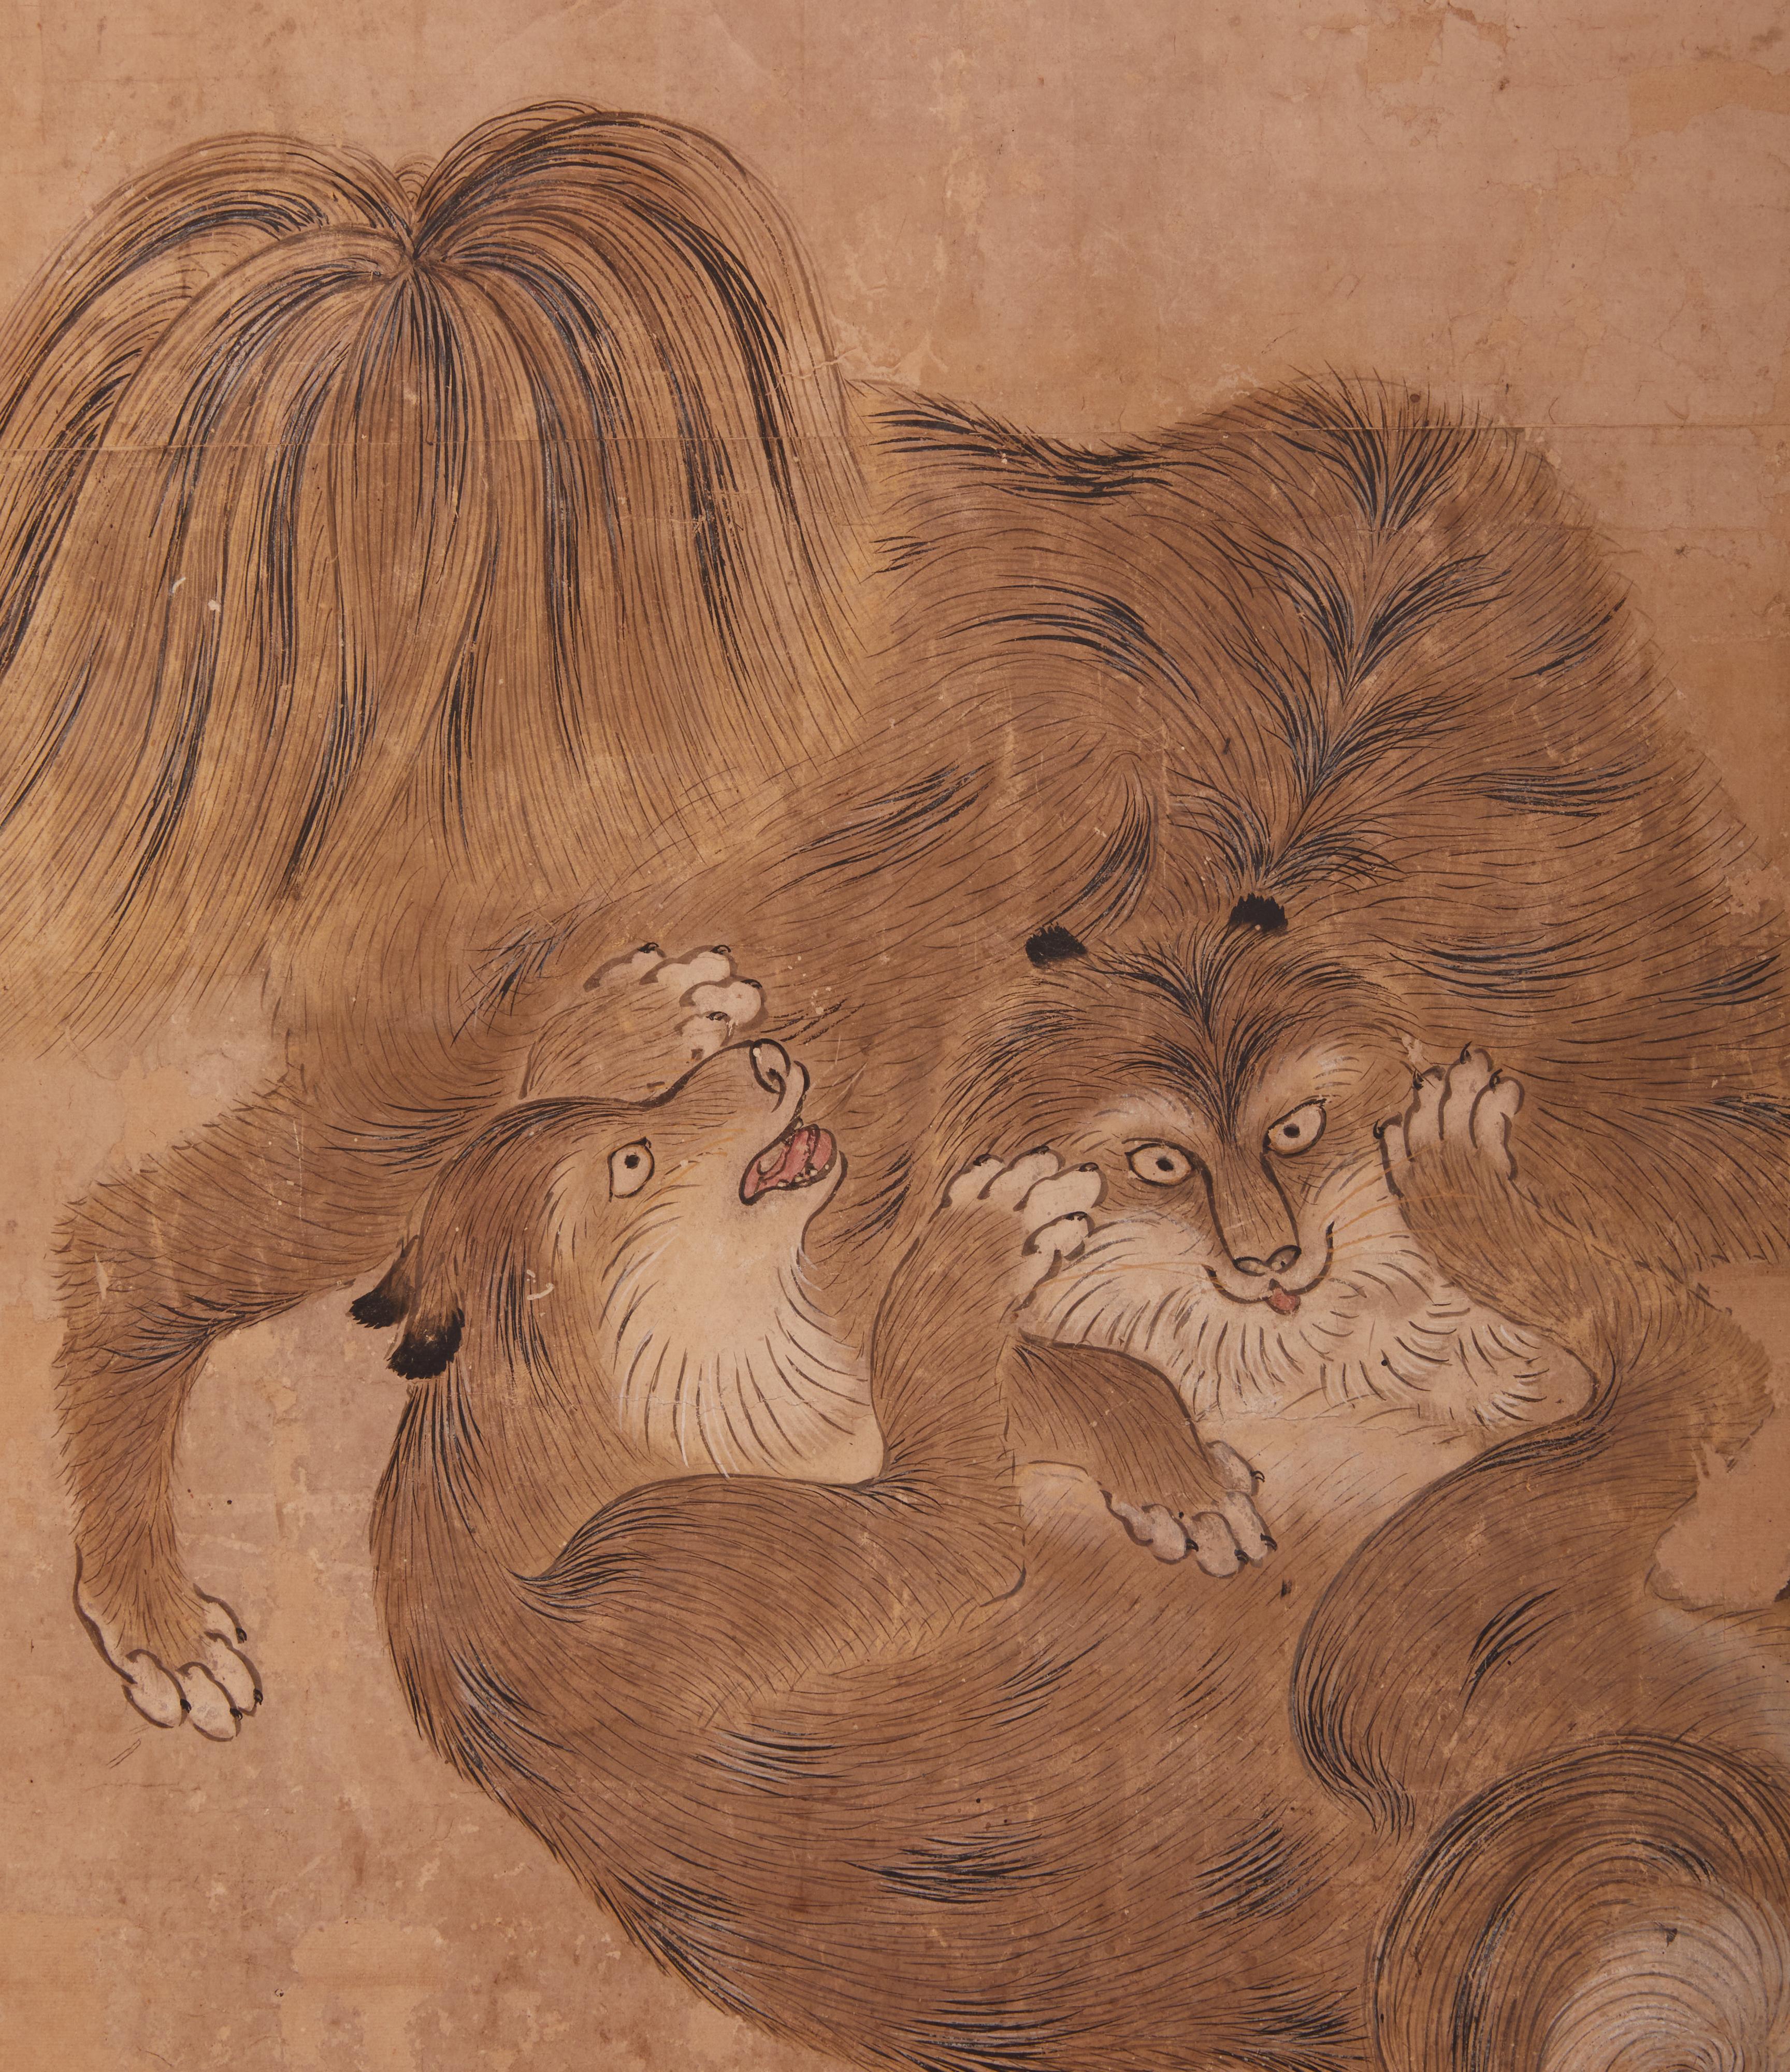 Japanese Two Panel Screen: Romping Cats Under Sago Palms
Beautifully painted mineral pigments on mulberry paper